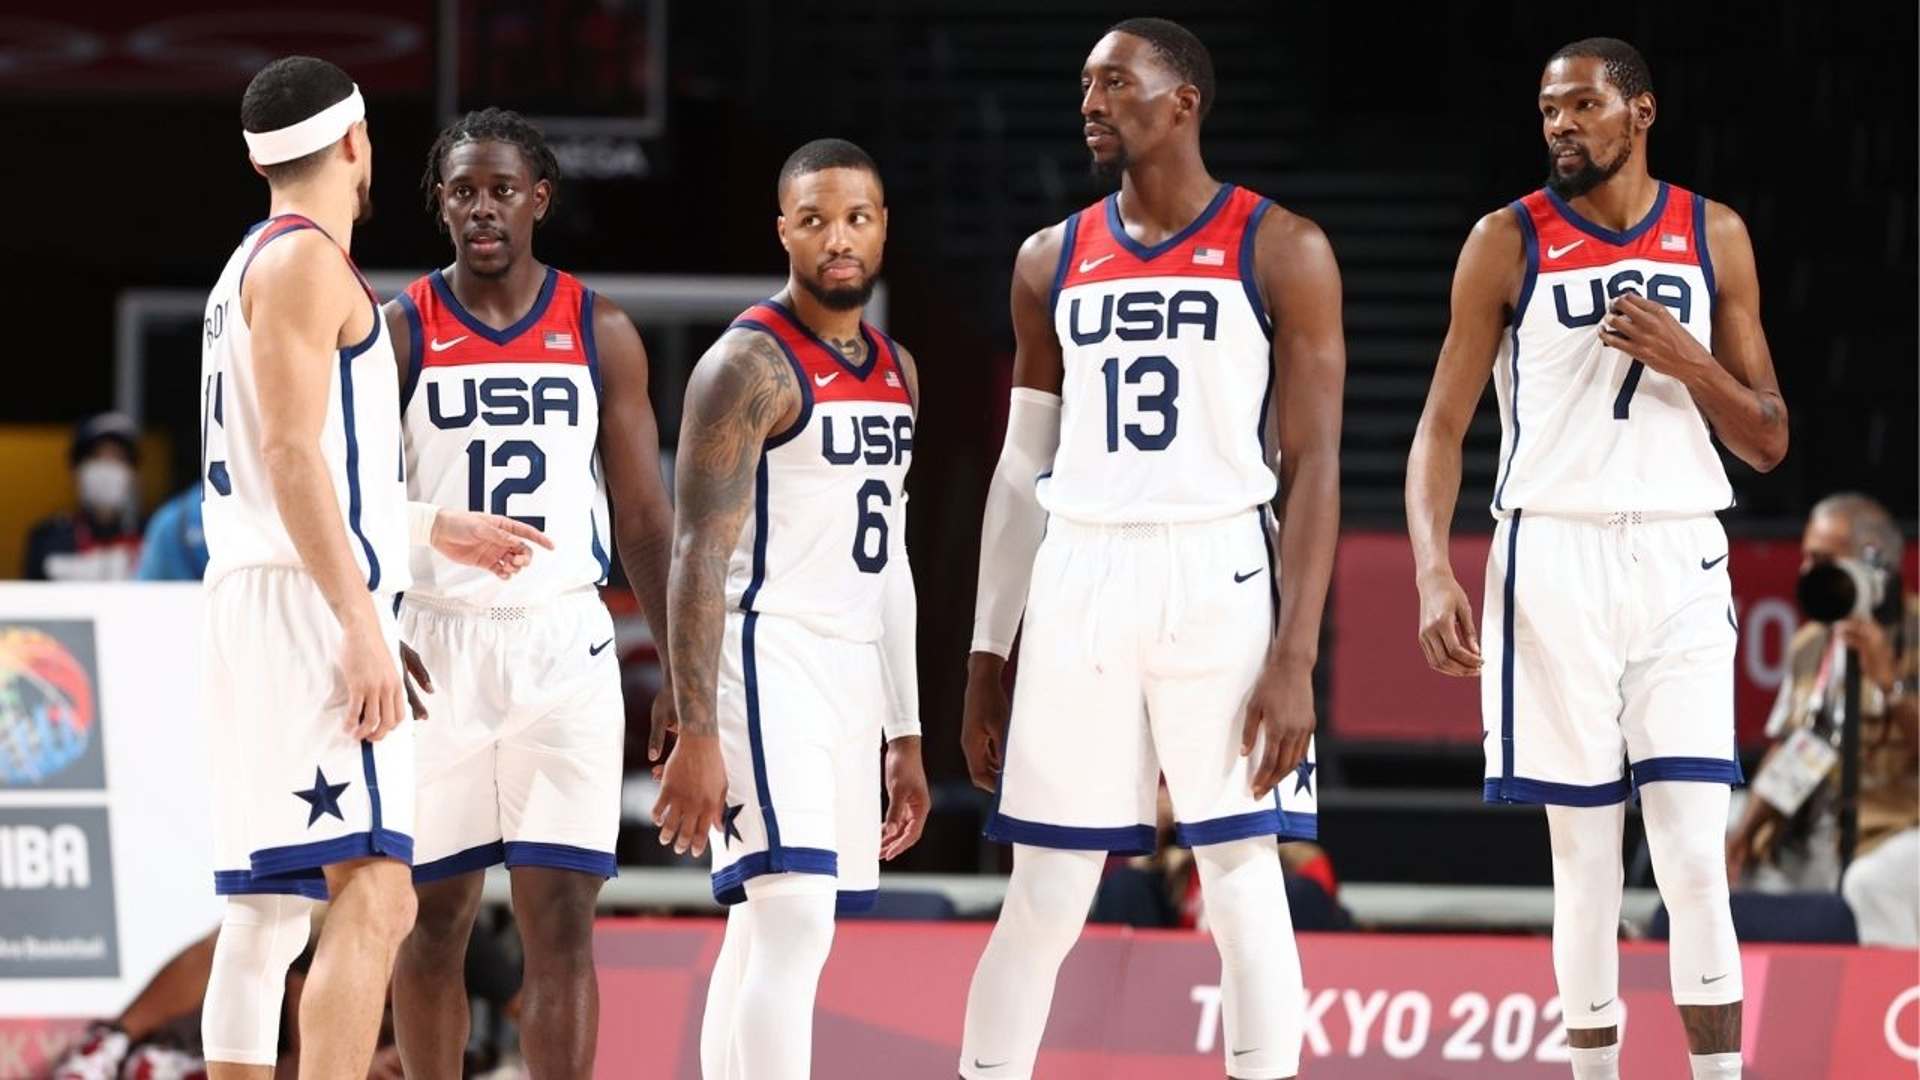 The 2022 FIBA AmeriCup Semifinals Argentina vs USA match will be held on September 10 (Image Credits: Twitter)